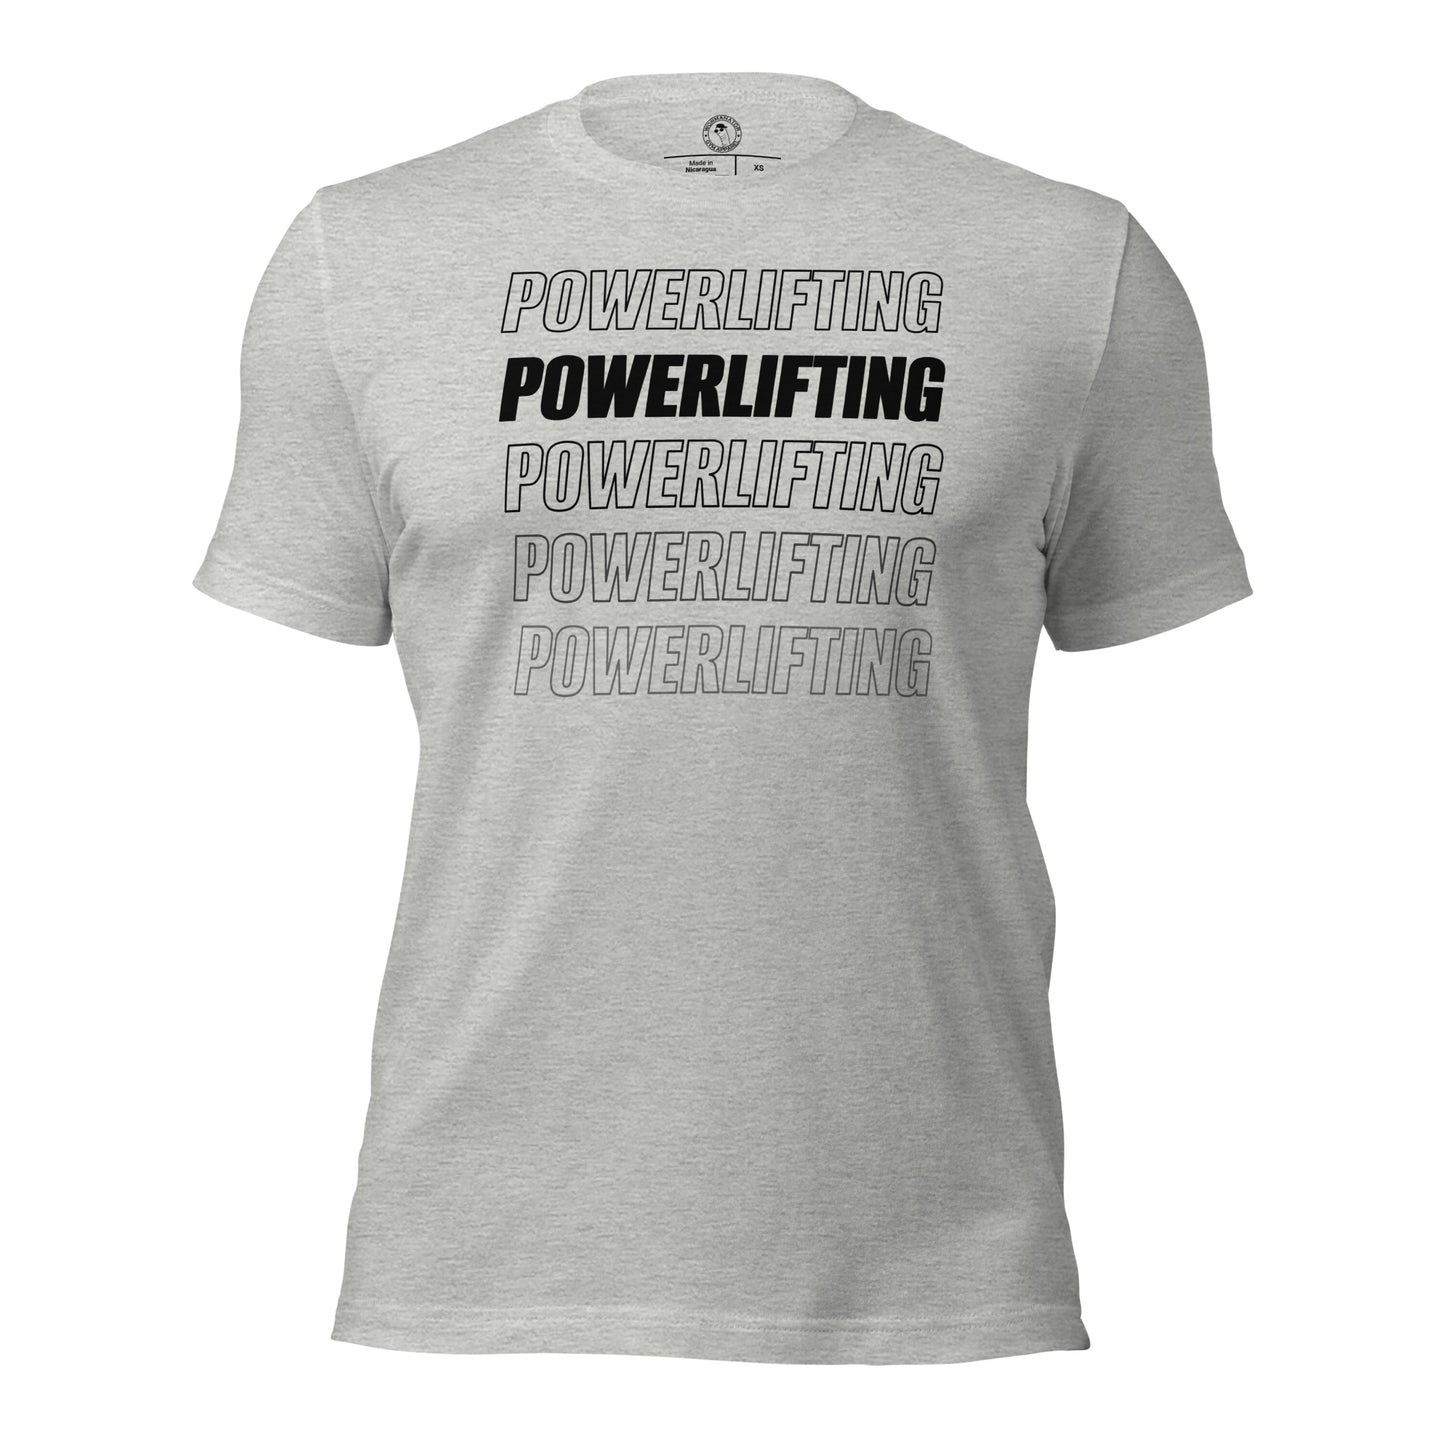 Powerlifting Shirt in Athletic Heather